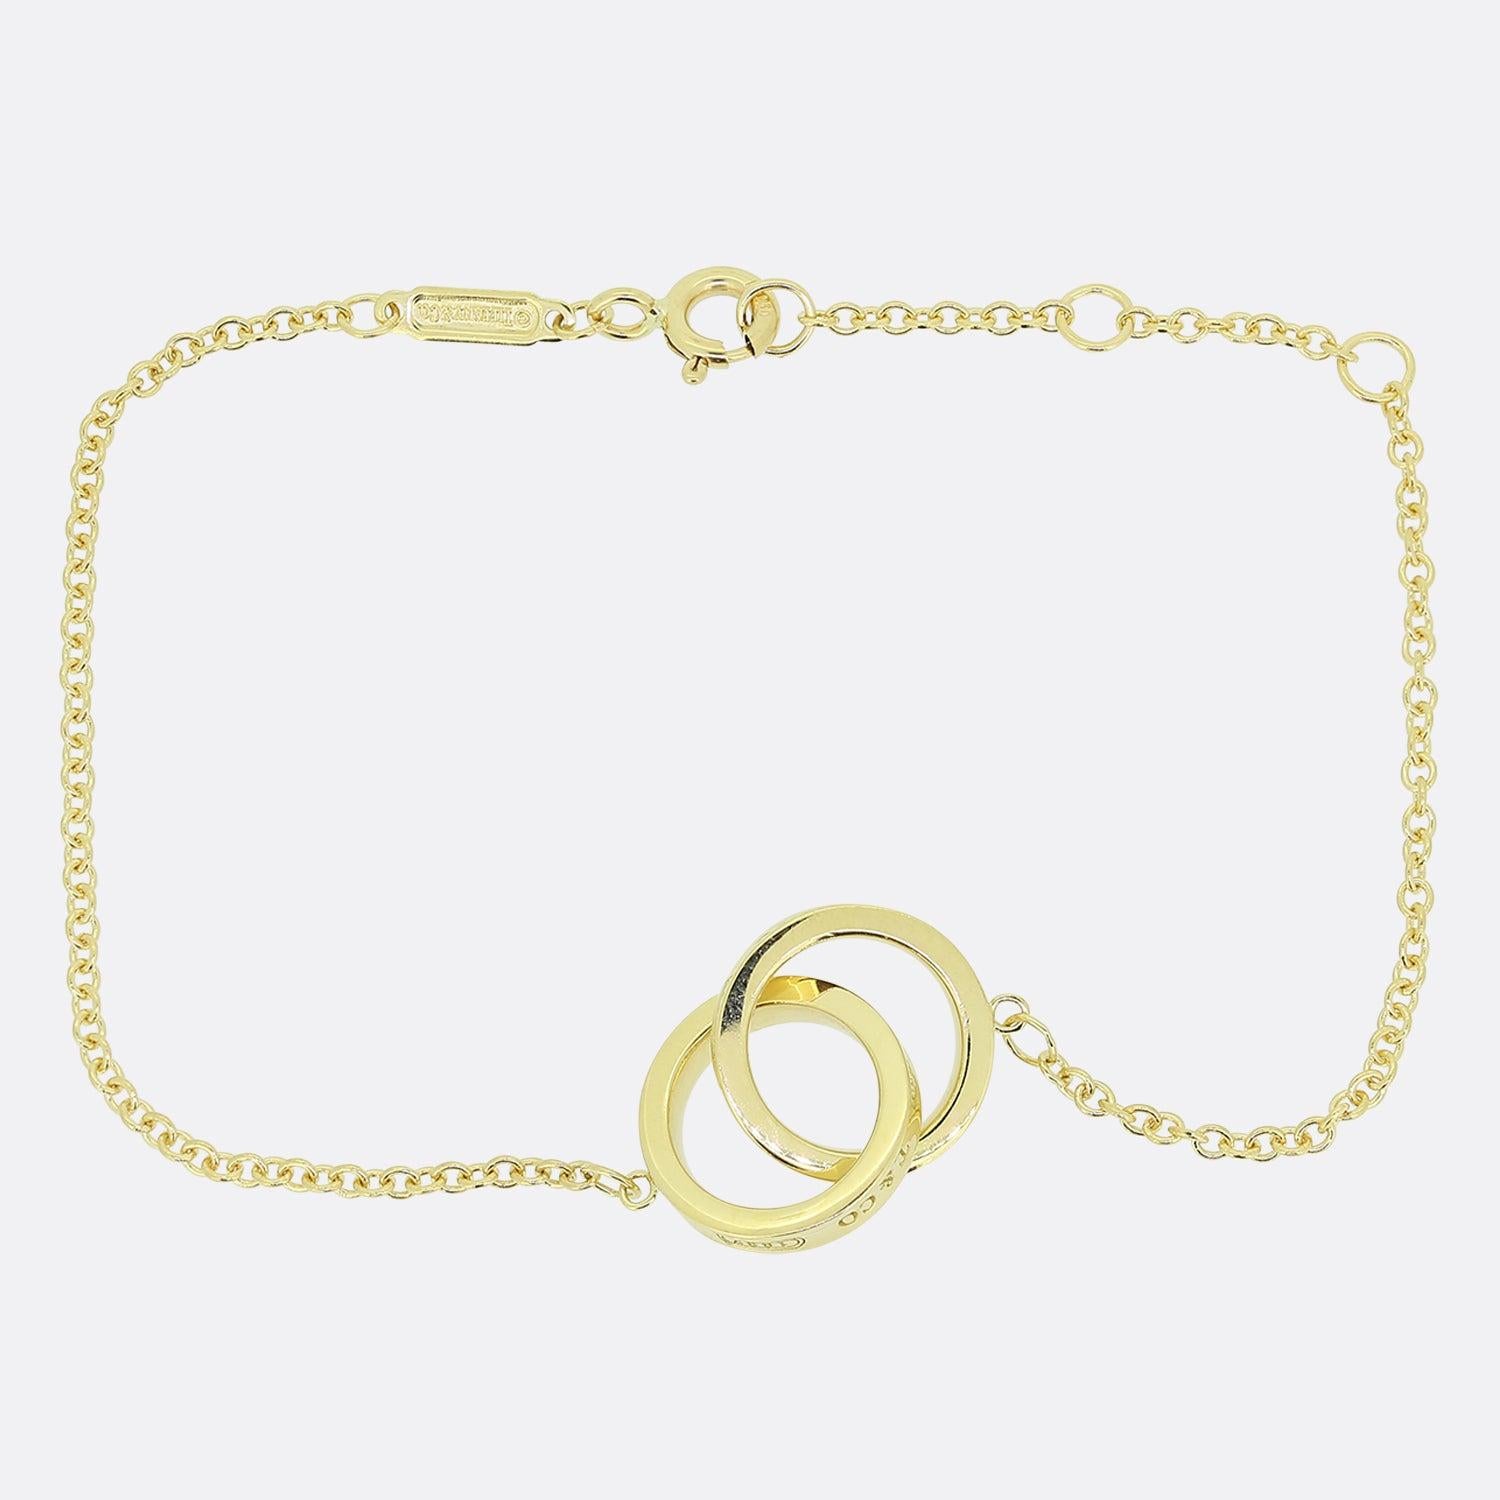 Here we have an 18ct yellow gold bracelet from the world renowned luxury jewellery designer, Tiffany & Co. A slim signed belcher chan plays host to a duo of matching rings sporting the iconic 'T&Co' initials and the founding year of '1837'.